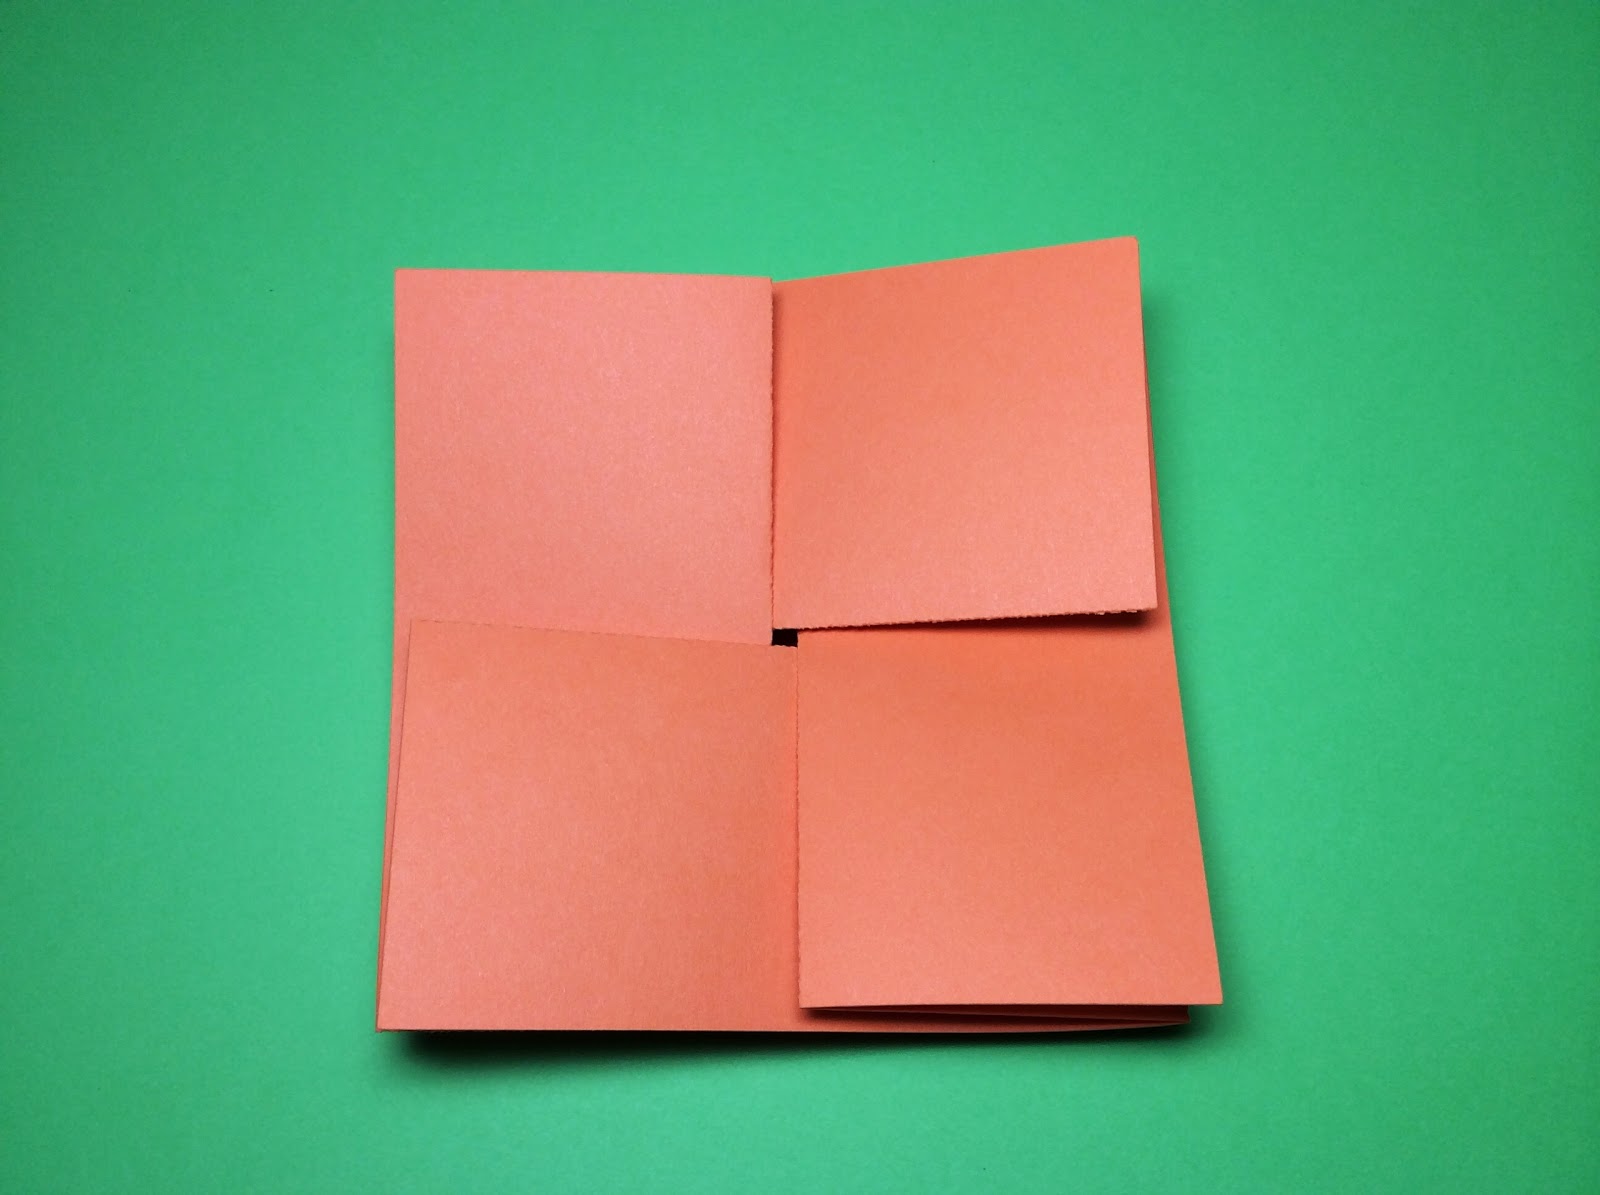 Papercrafts and other fun things: An Origami Square Card with a Diamond